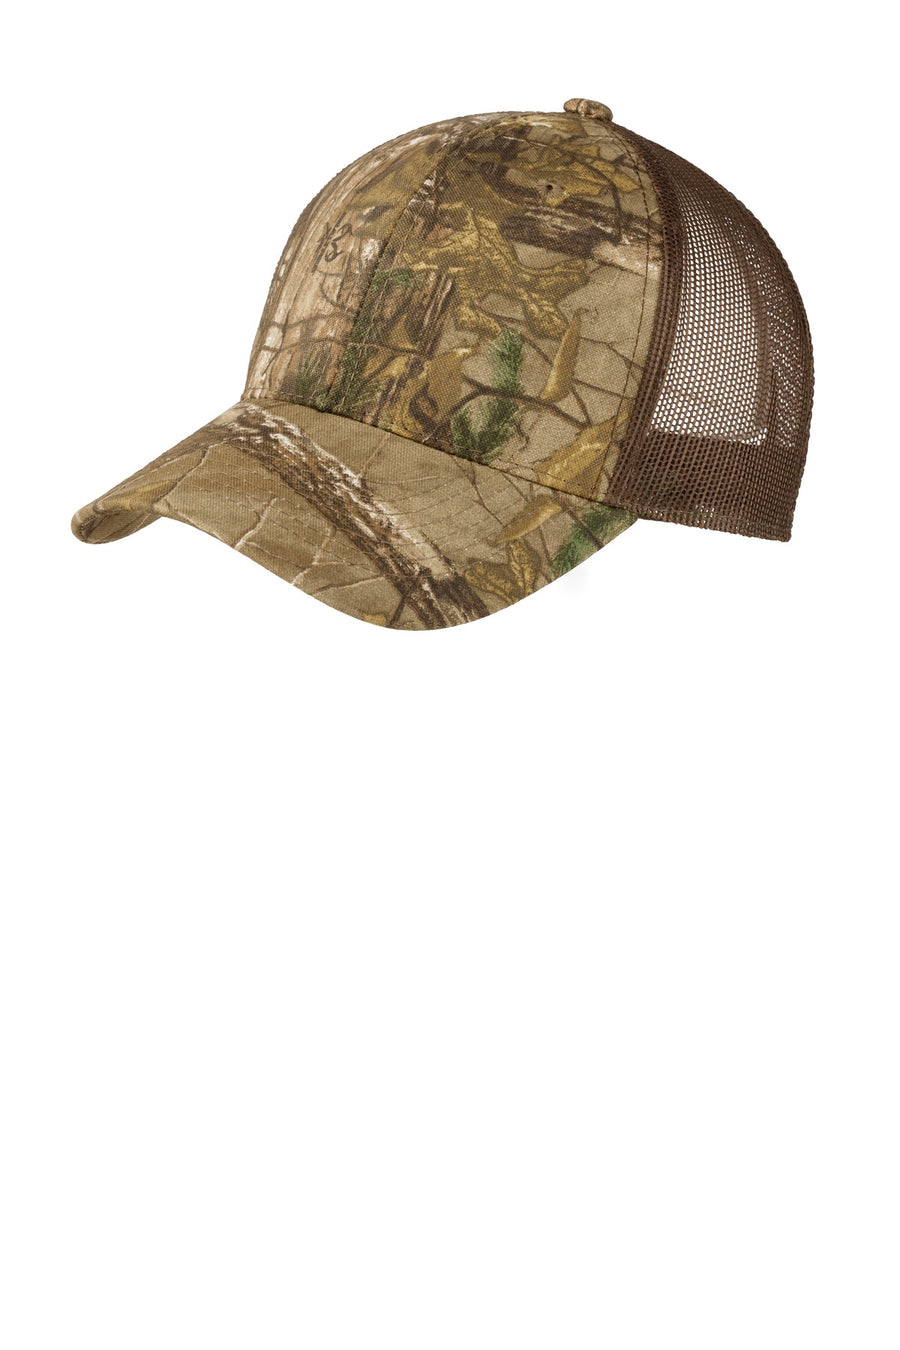 C930-Realtree Xtra/ Brown-front_model